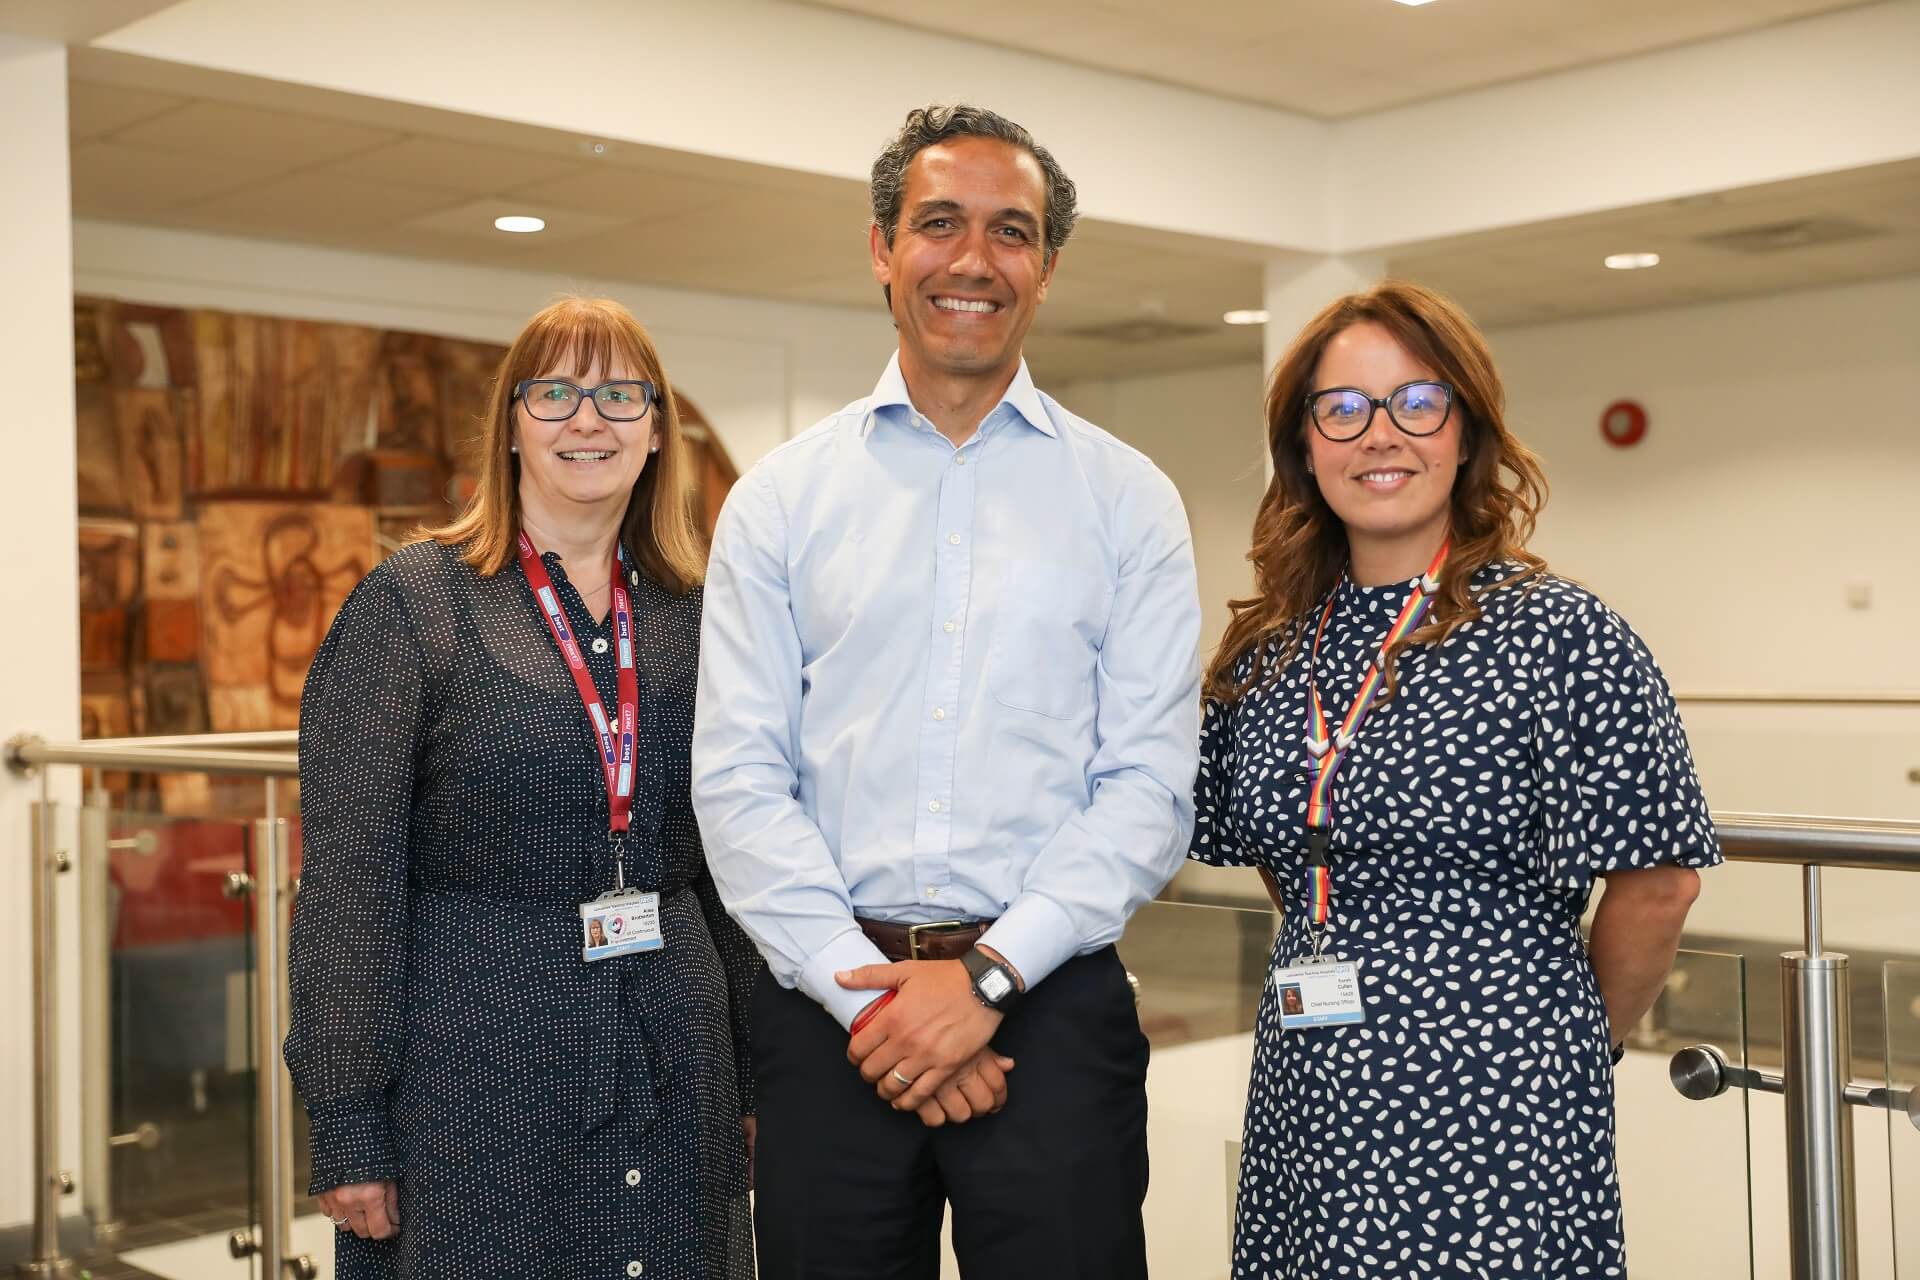 A professional photo depicting three smiling NHS staff members